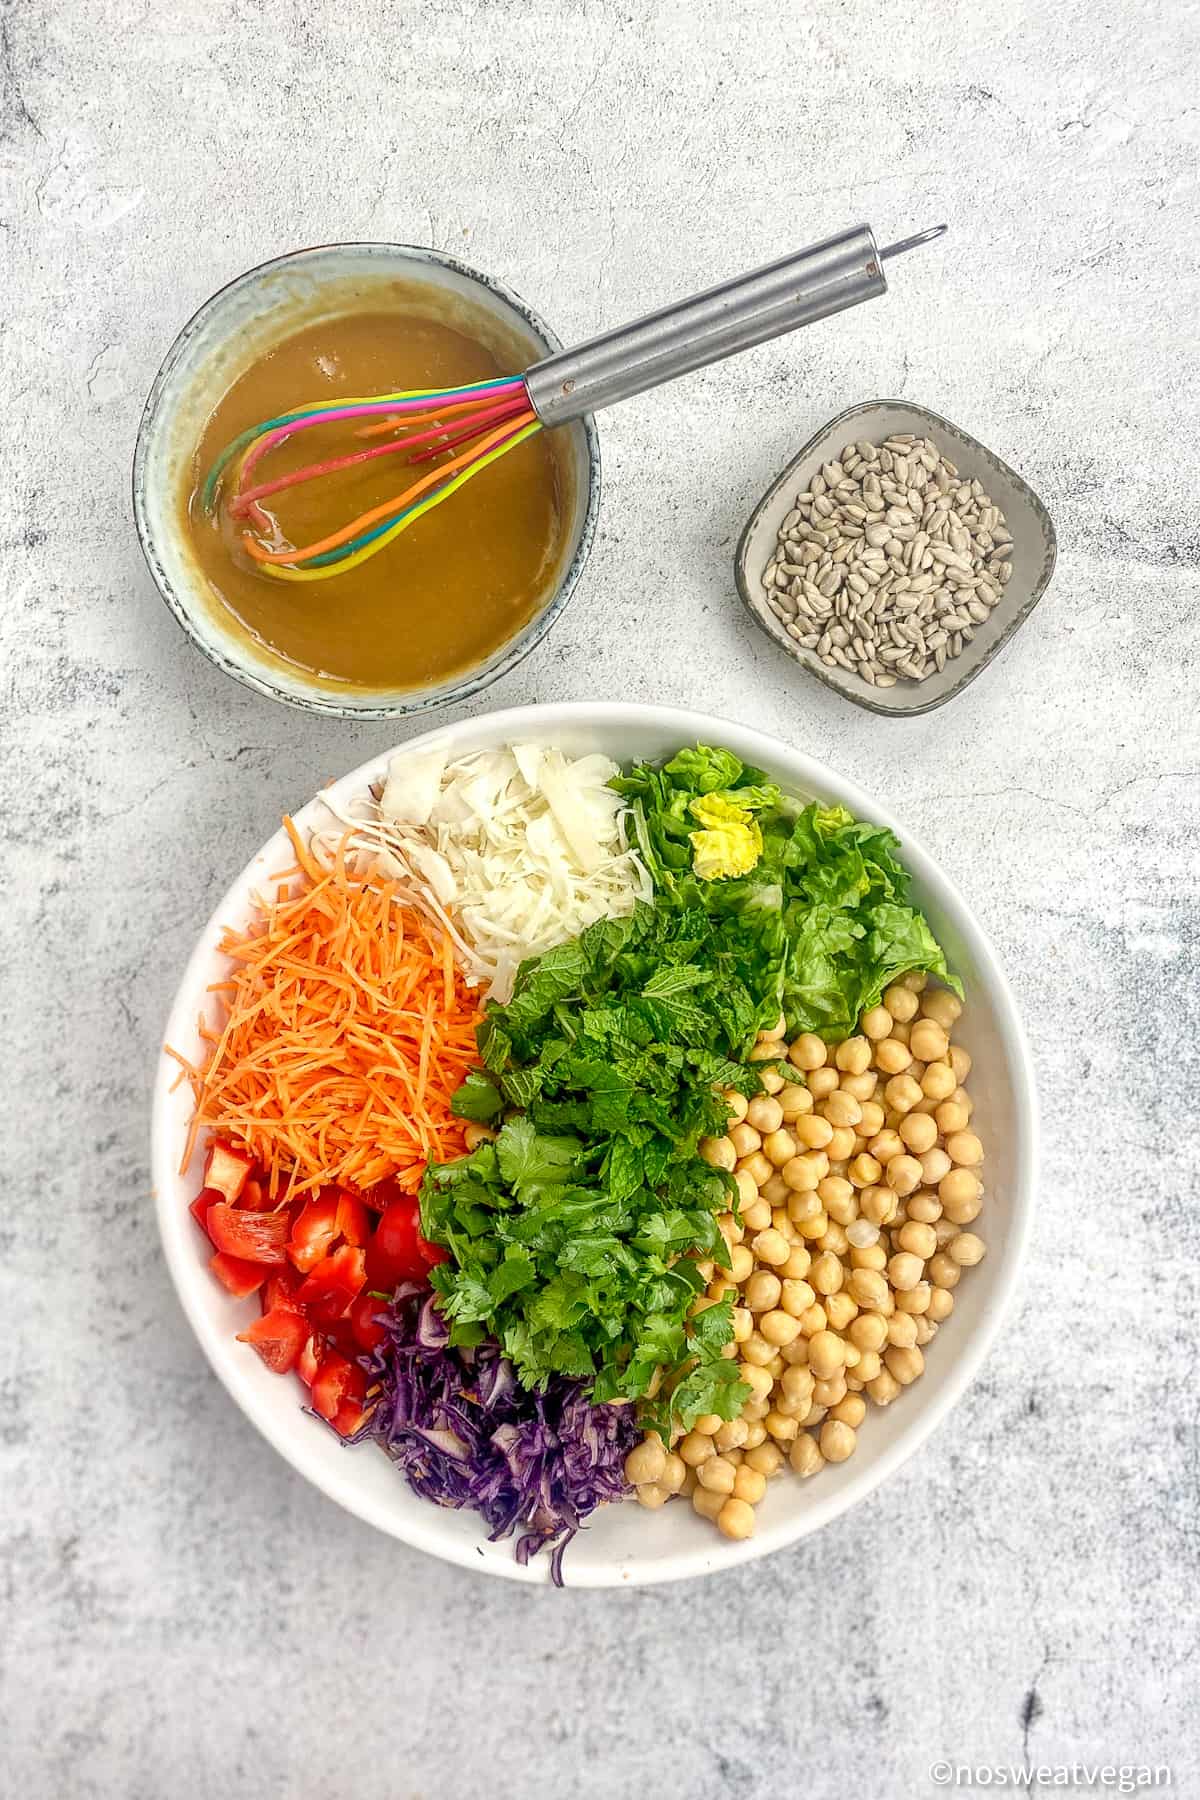 Rainbow salad in a bowl next to a smaller bowl of dressing and a bowl of sunflower seeds.